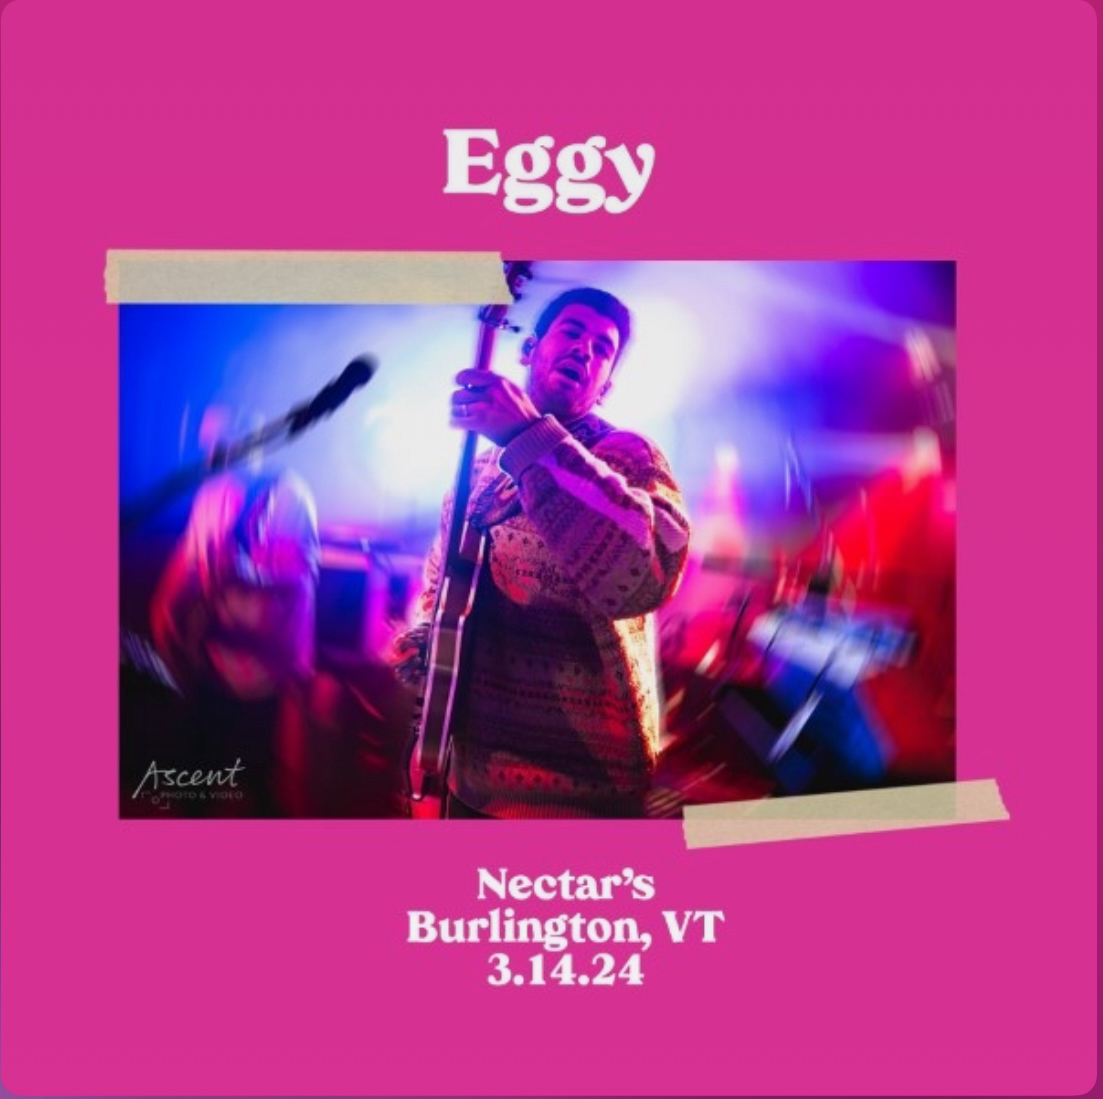 Promotional image for a band named Eggy with a date for a performance at Nectar’s in Burlington, VT on 3.14.24. The central figure is a musician holding a microphone with blurred stage lighting in the background.